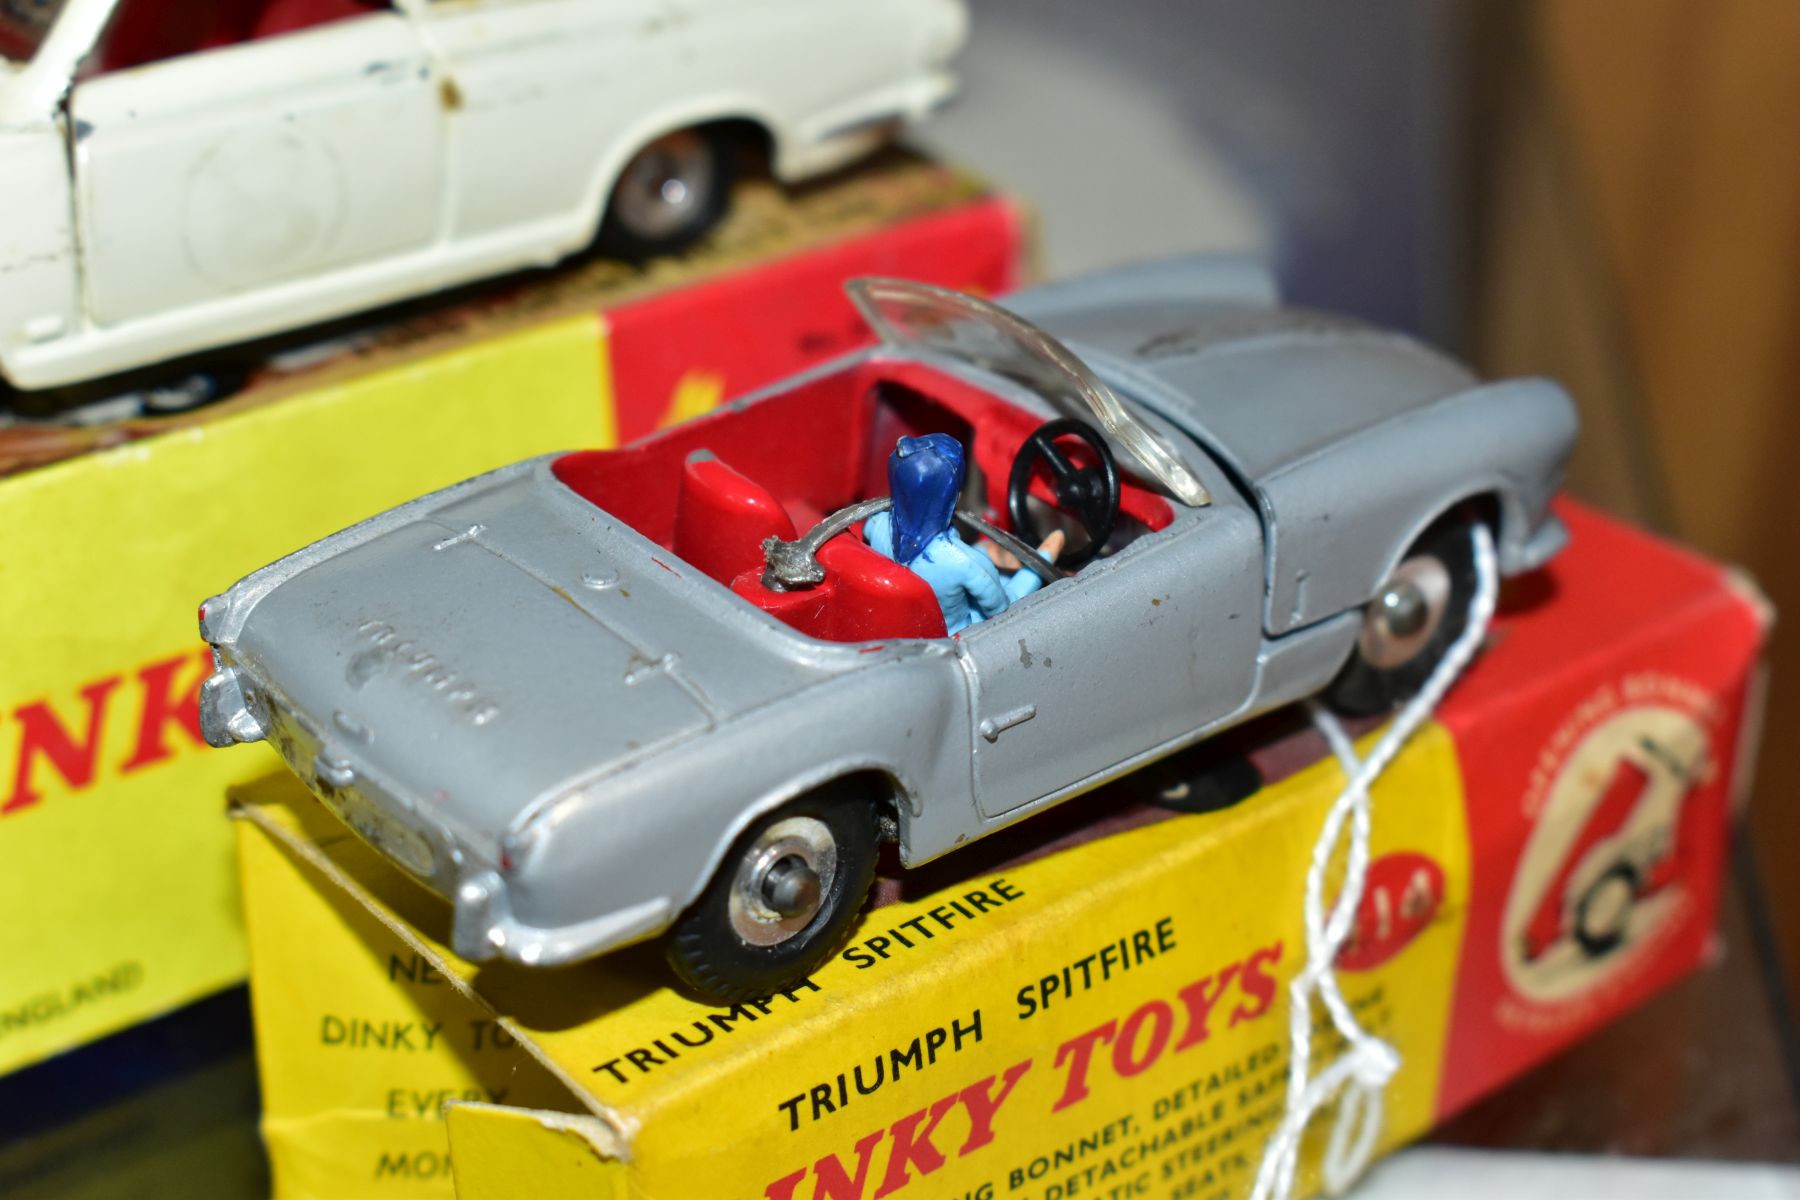 THREE BOXED DINKY TOYS CARS, Truimph Spitfire, No 114 metallic silver grey body, red interior, - Image 3 of 9